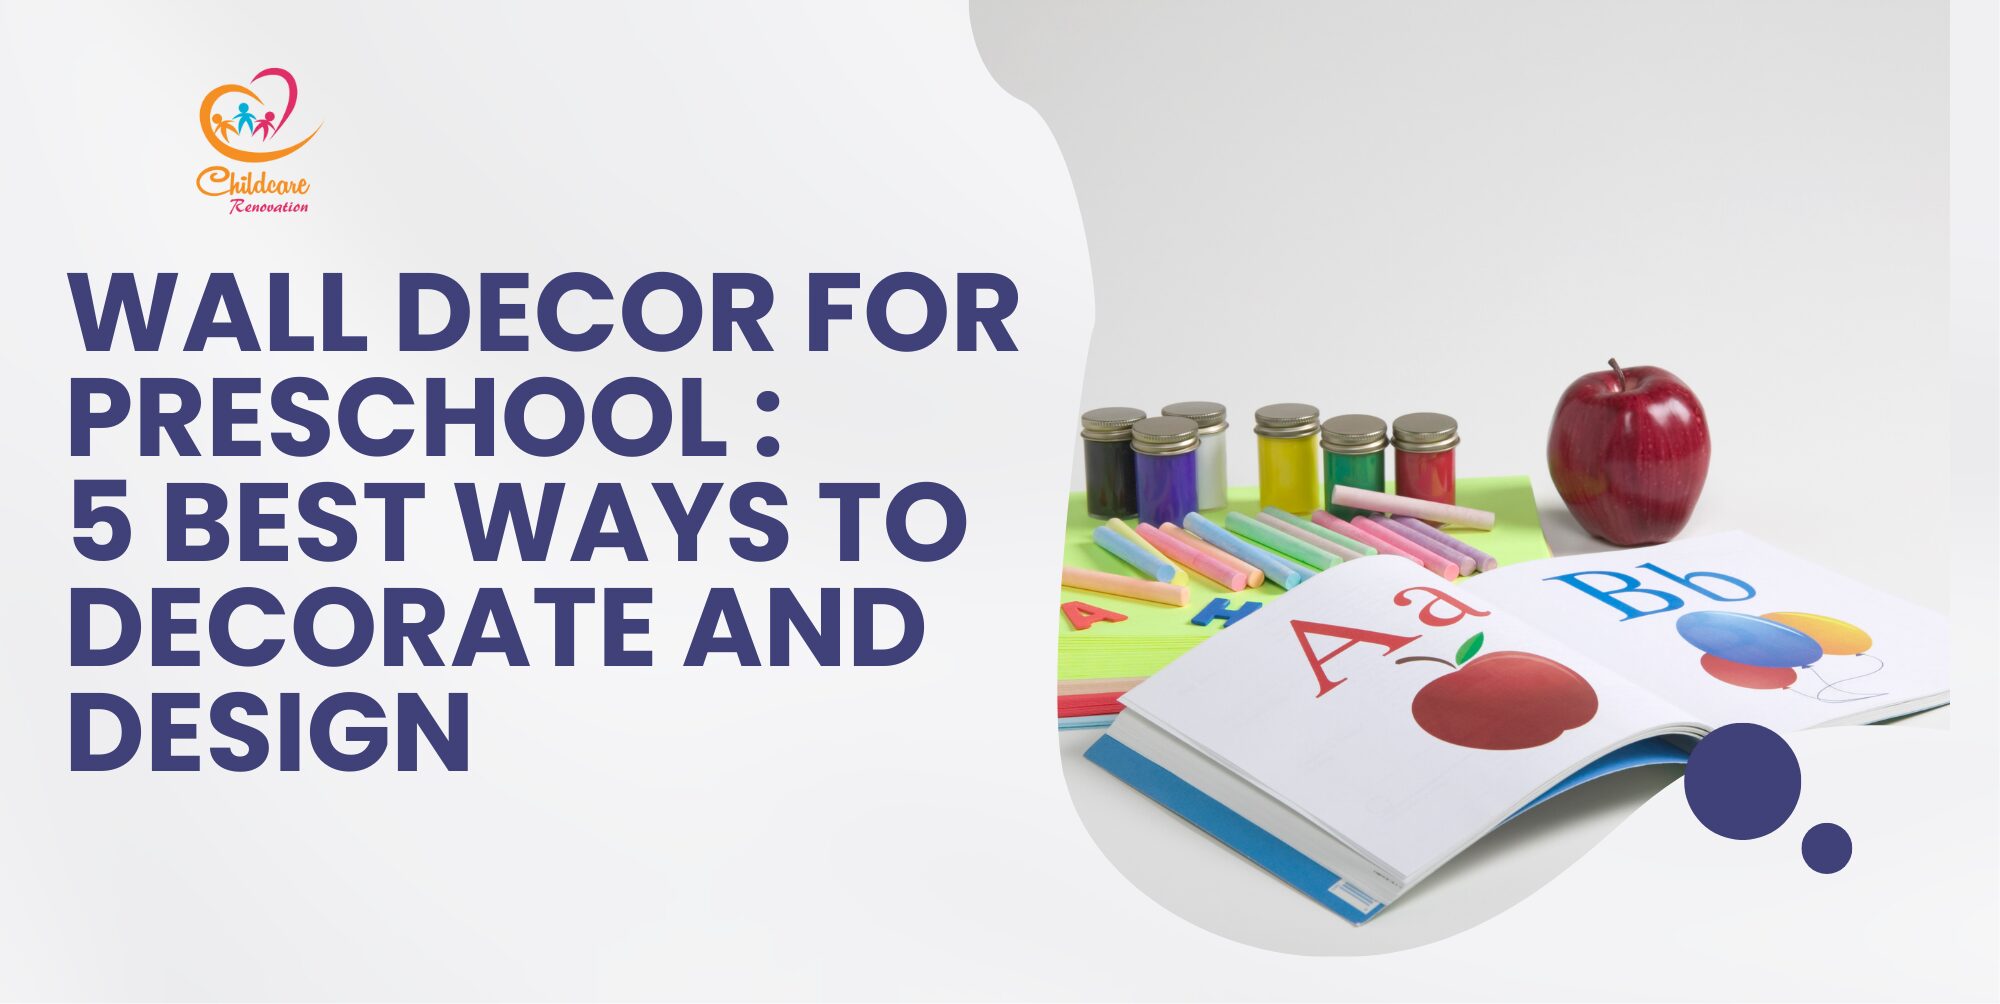 Wall Decor for Preschool : 5 Best Ways to Decorate and Design